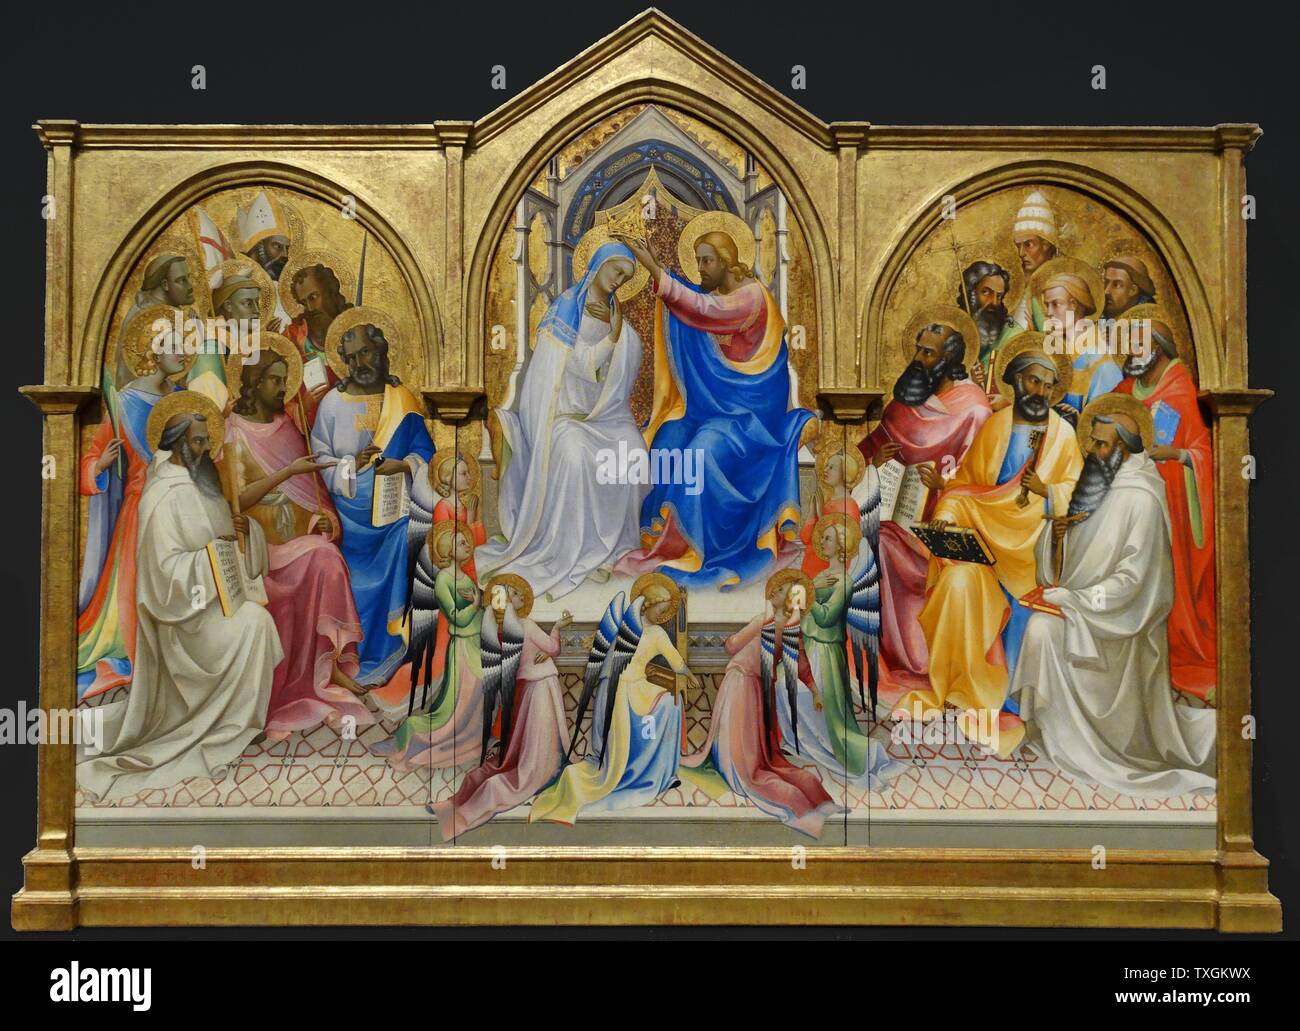 Painting titled 'The Coronation of the Virgin with Adoring Saints' by Lorenzo Monaco (1370-1425) an Italian painter of the late Gothic-early Renaissance age. Dated 15th Century Stock Photo